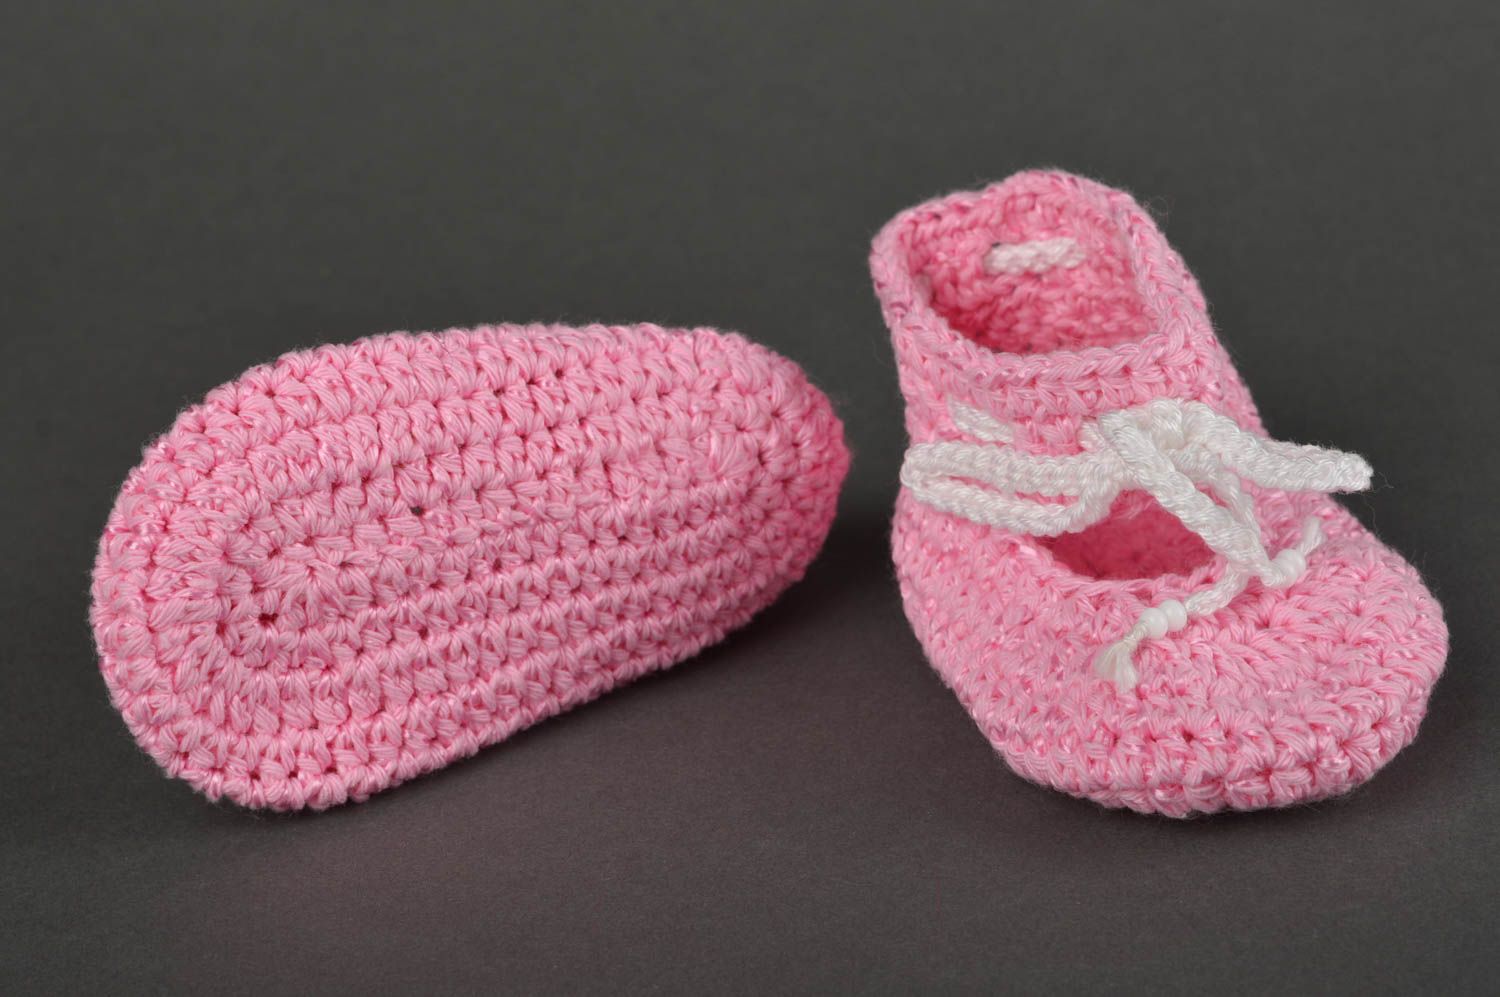 Handmade crocheted baby bootees unusual shoes for newborns stylish shoes photo 2